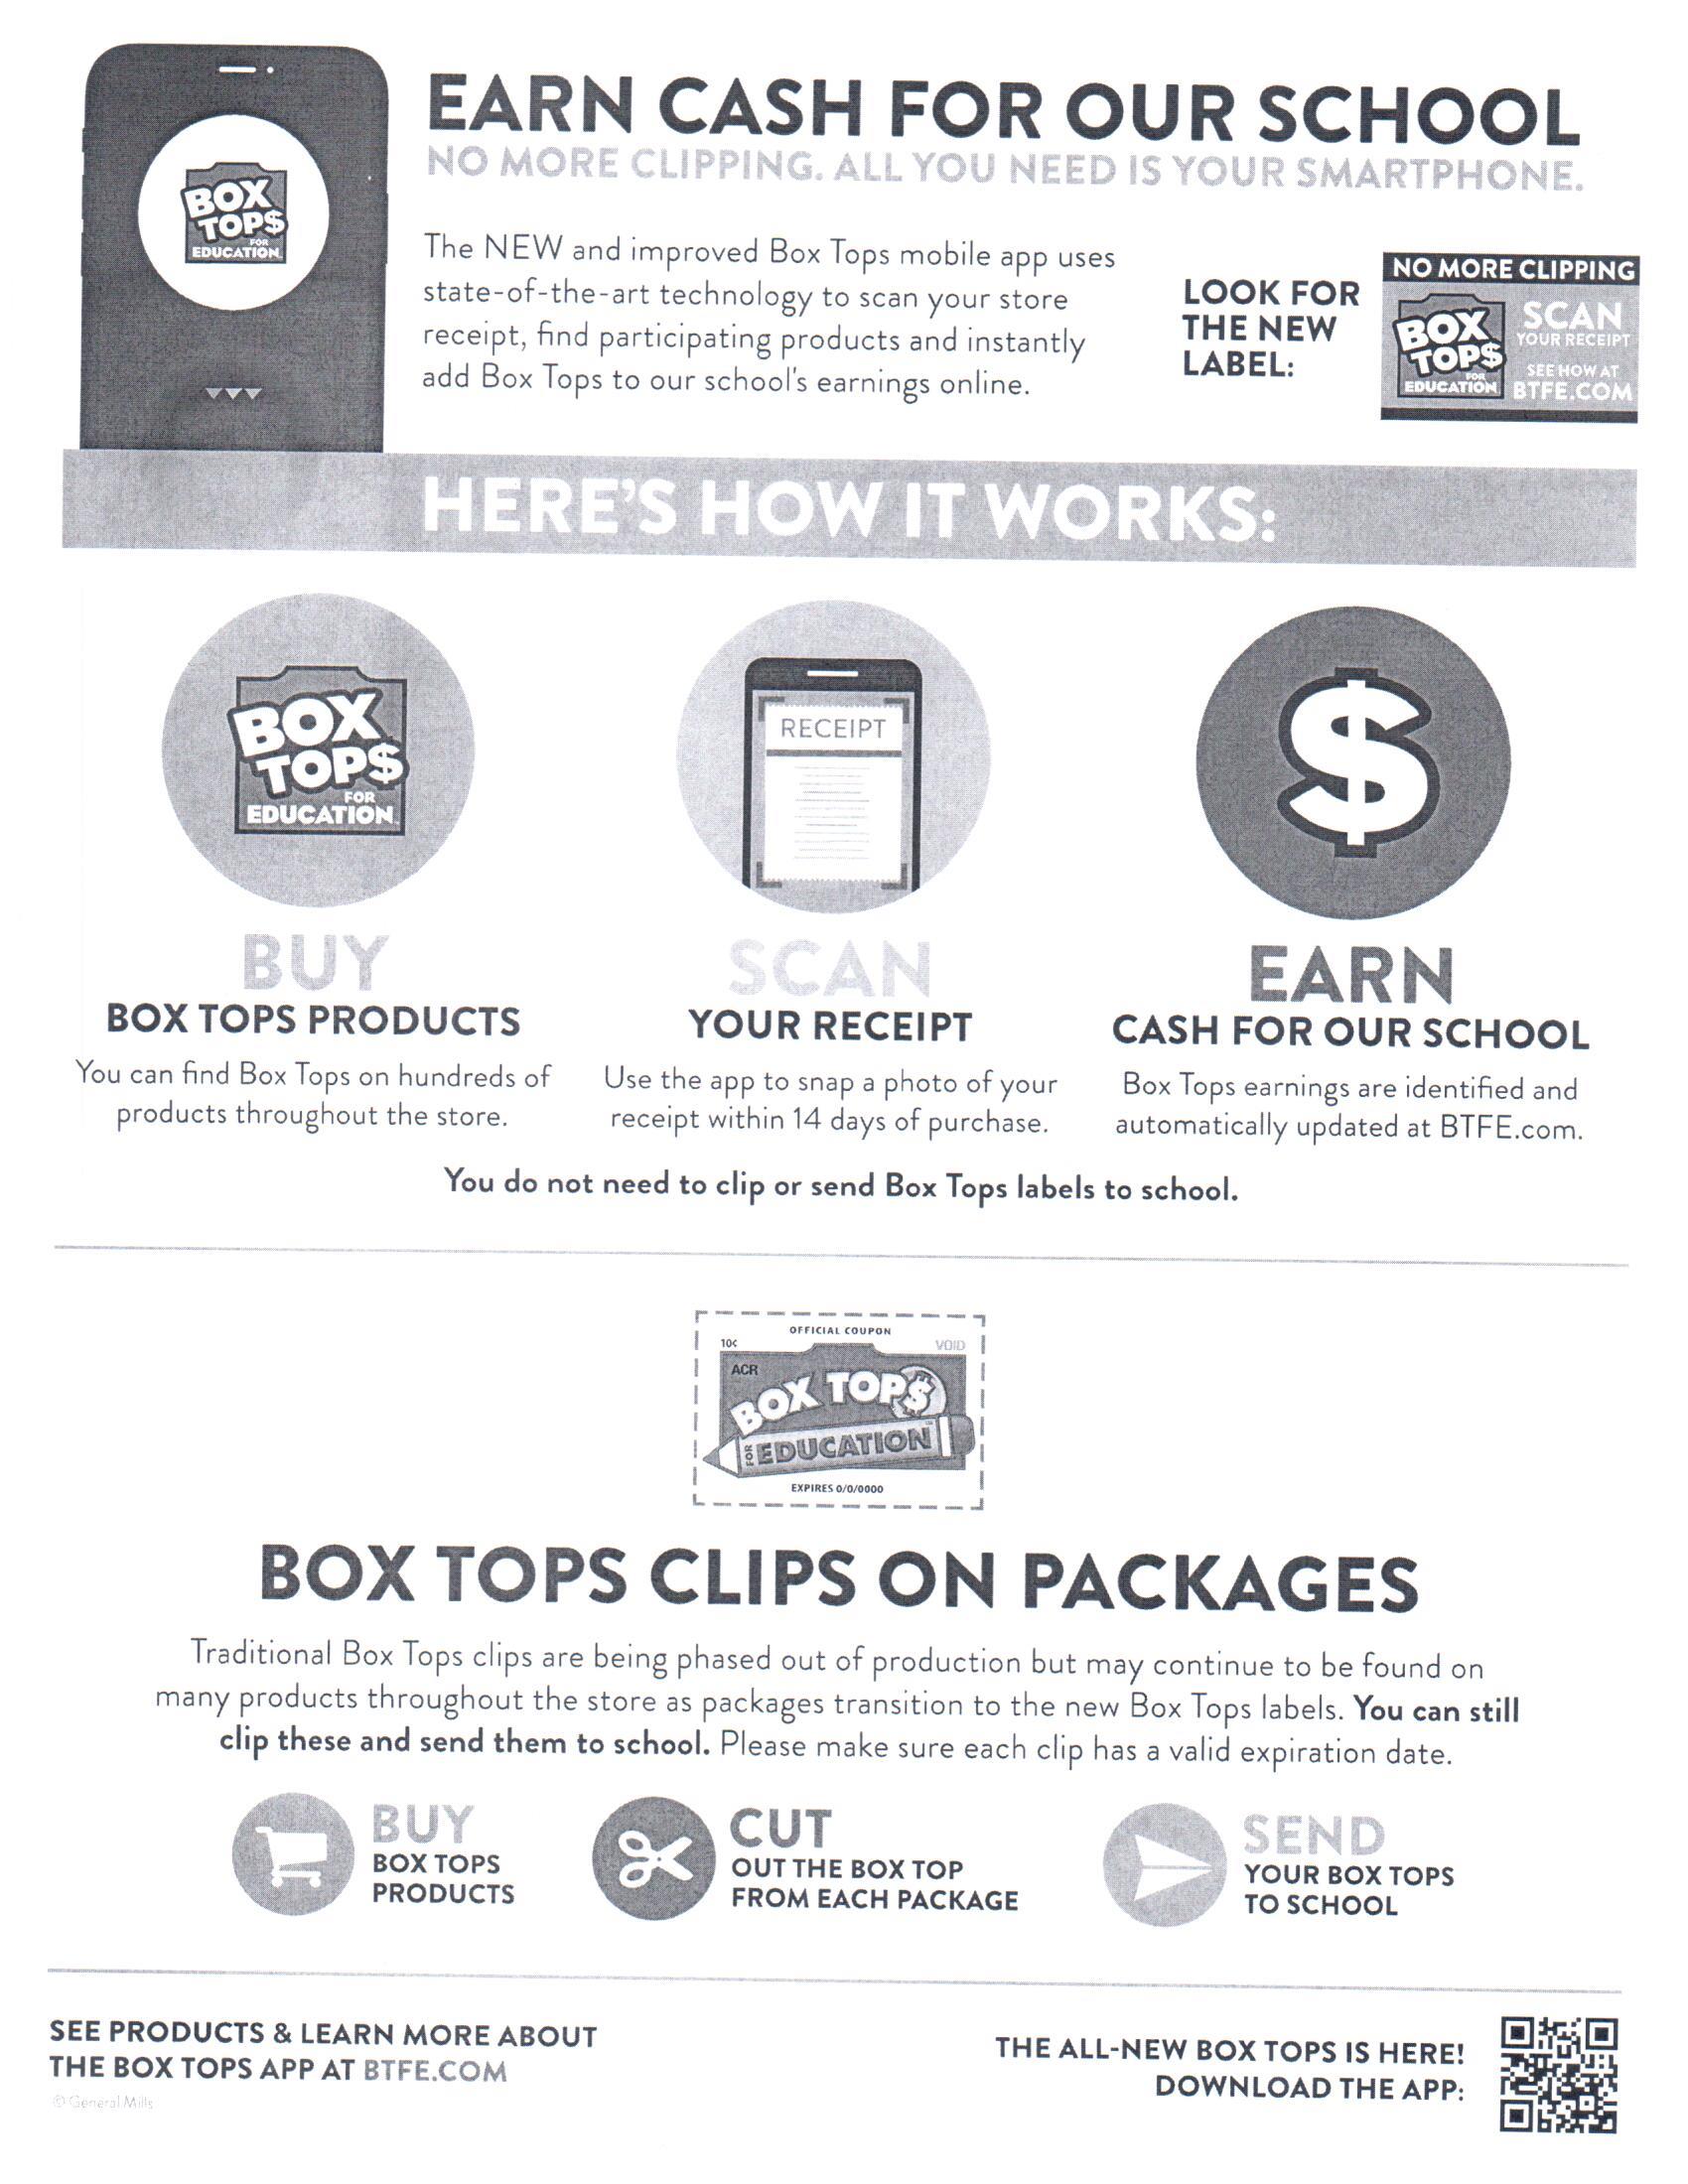 BOX TOPS FOR EDUCATION INFO